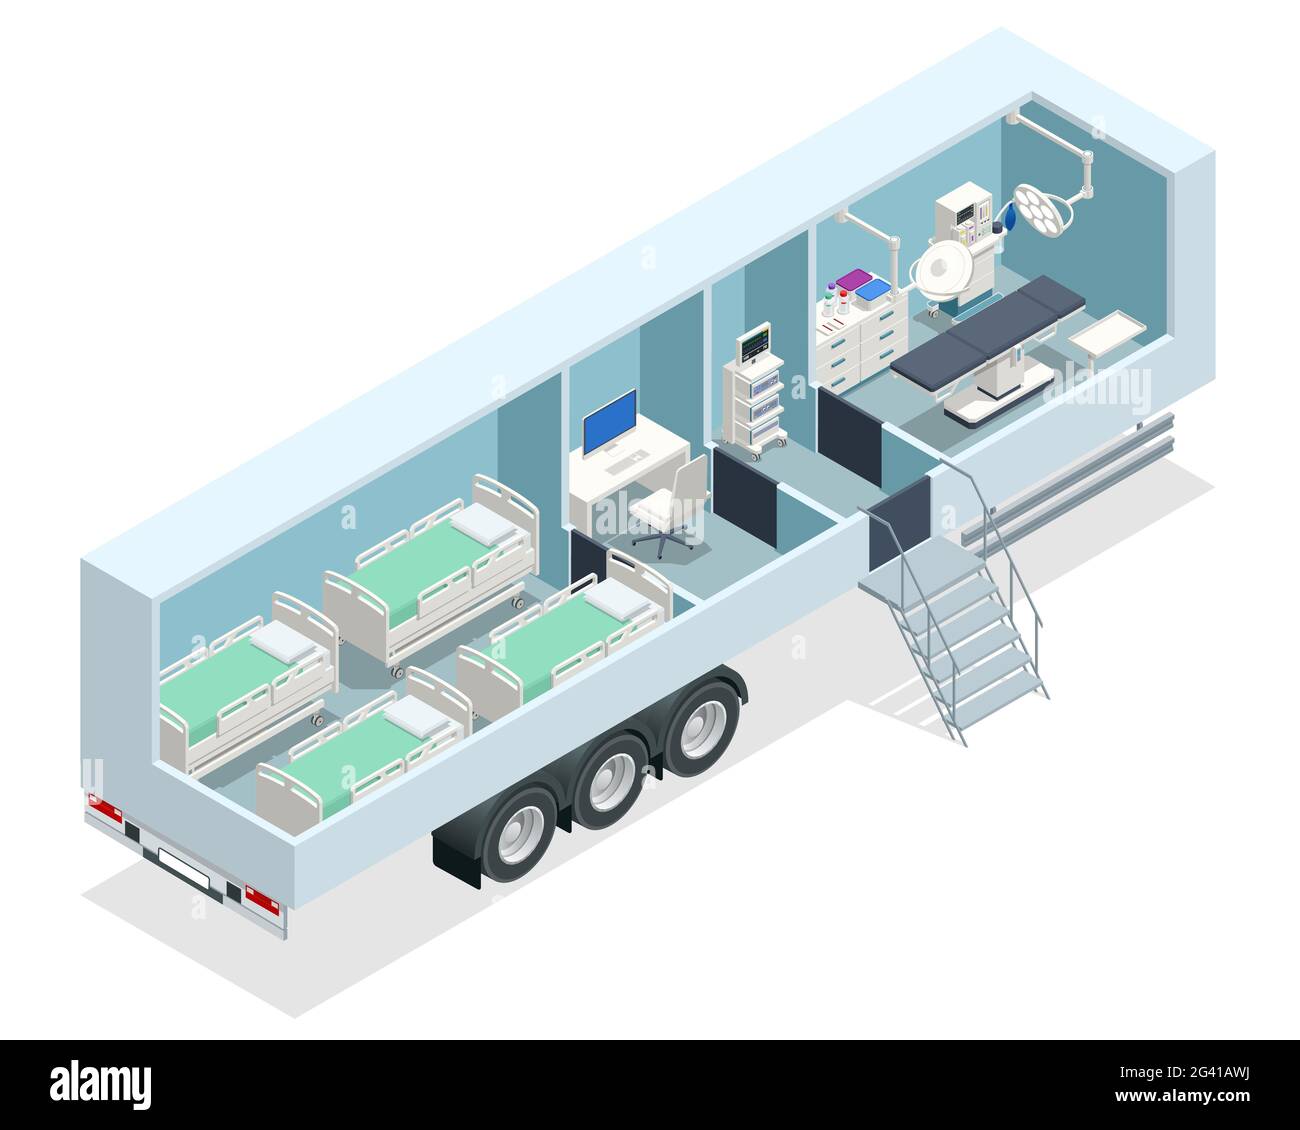 Isometric hospital in the car. Mobile hospital with medical beds, laboratory and operating room. Stock Vector